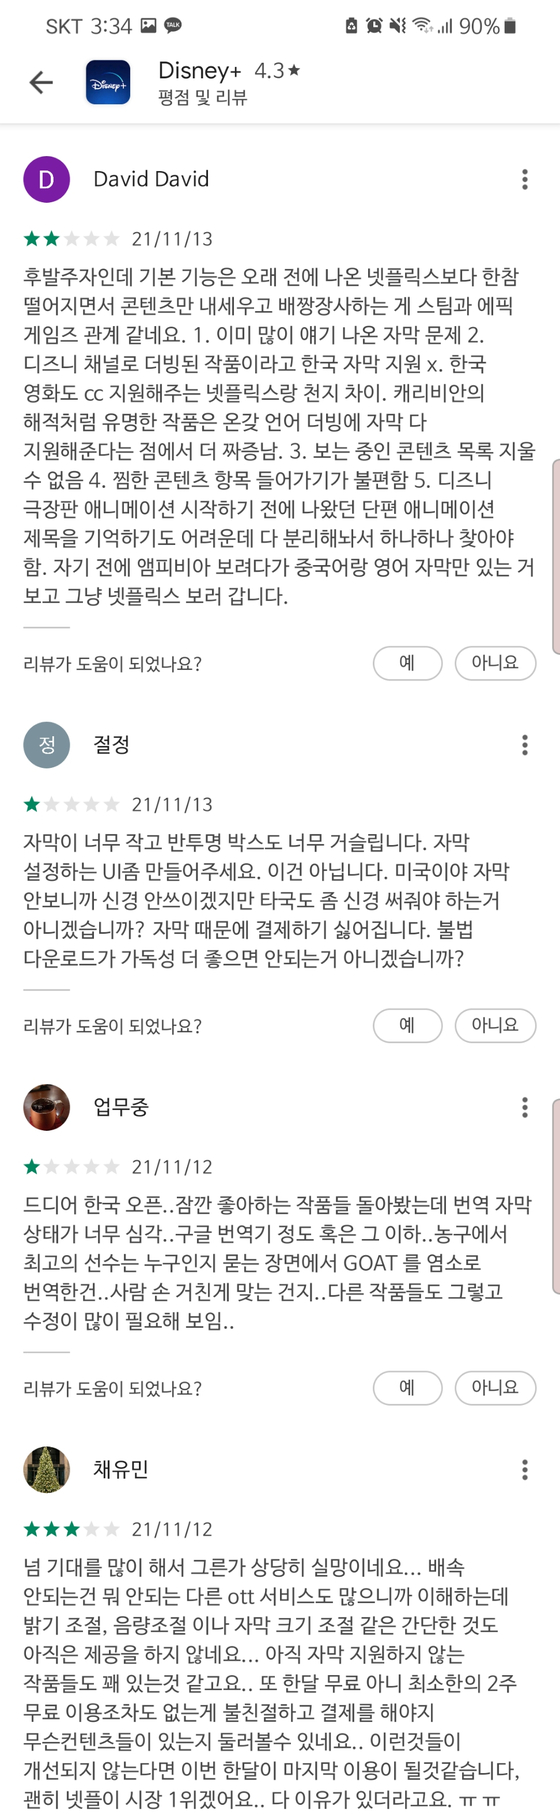 Shortly after the app became available for Korean users on Friday, users started posting disappointed reviews on the Google Play Store. [SCREEN CAPTURE]